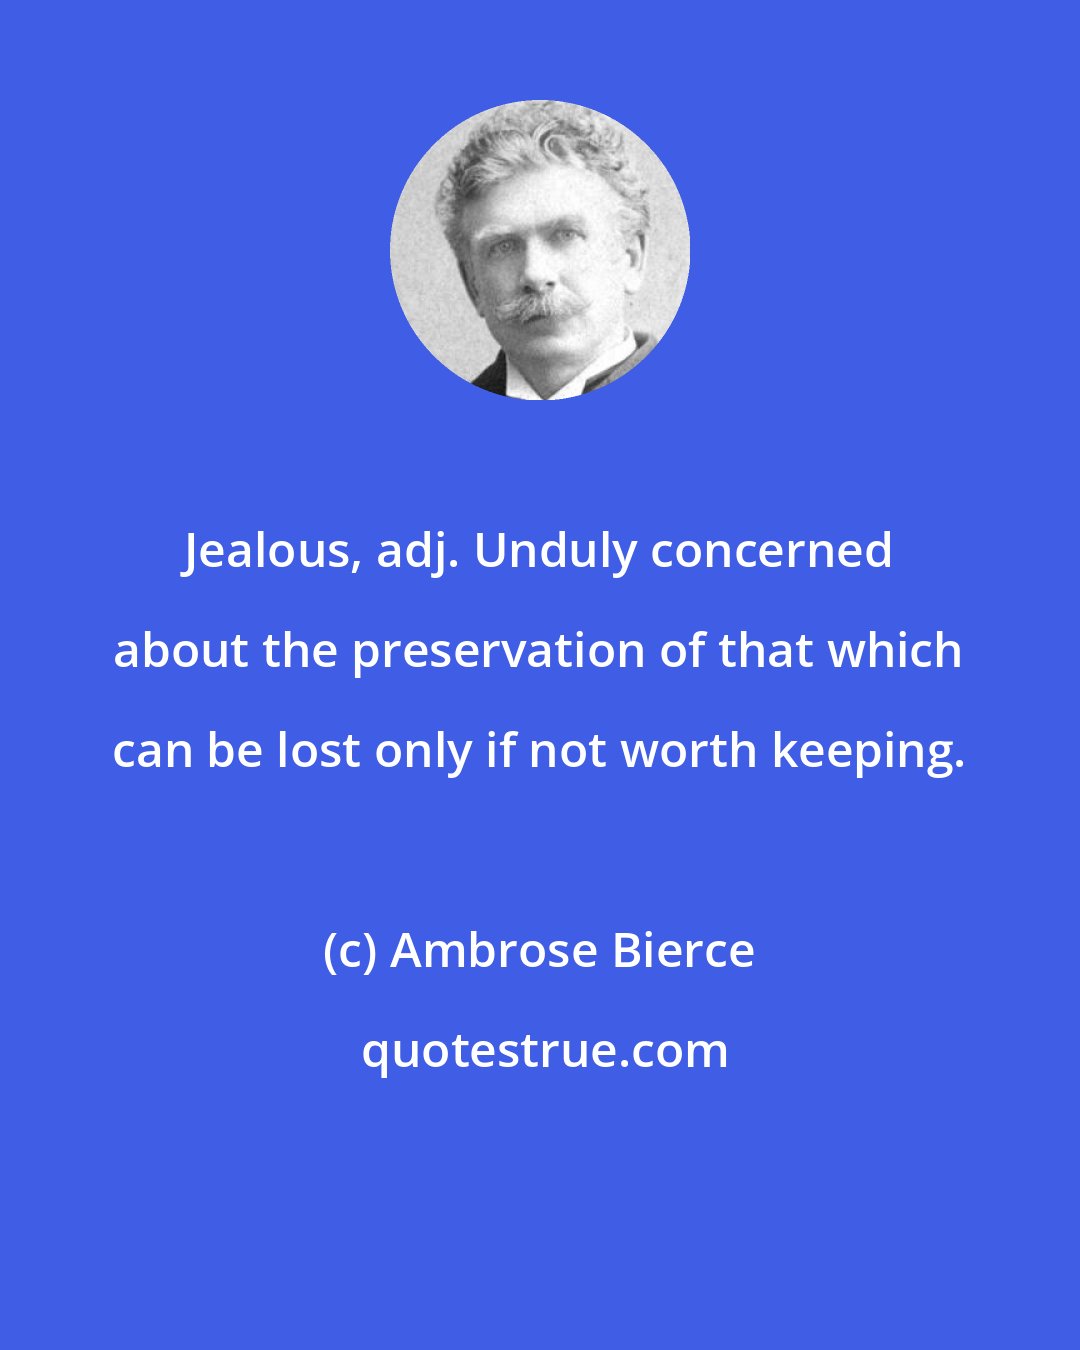 Ambrose Bierce: Jealous, adj. Unduly concerned about the preservation of that which can be lost only if not worth keeping.